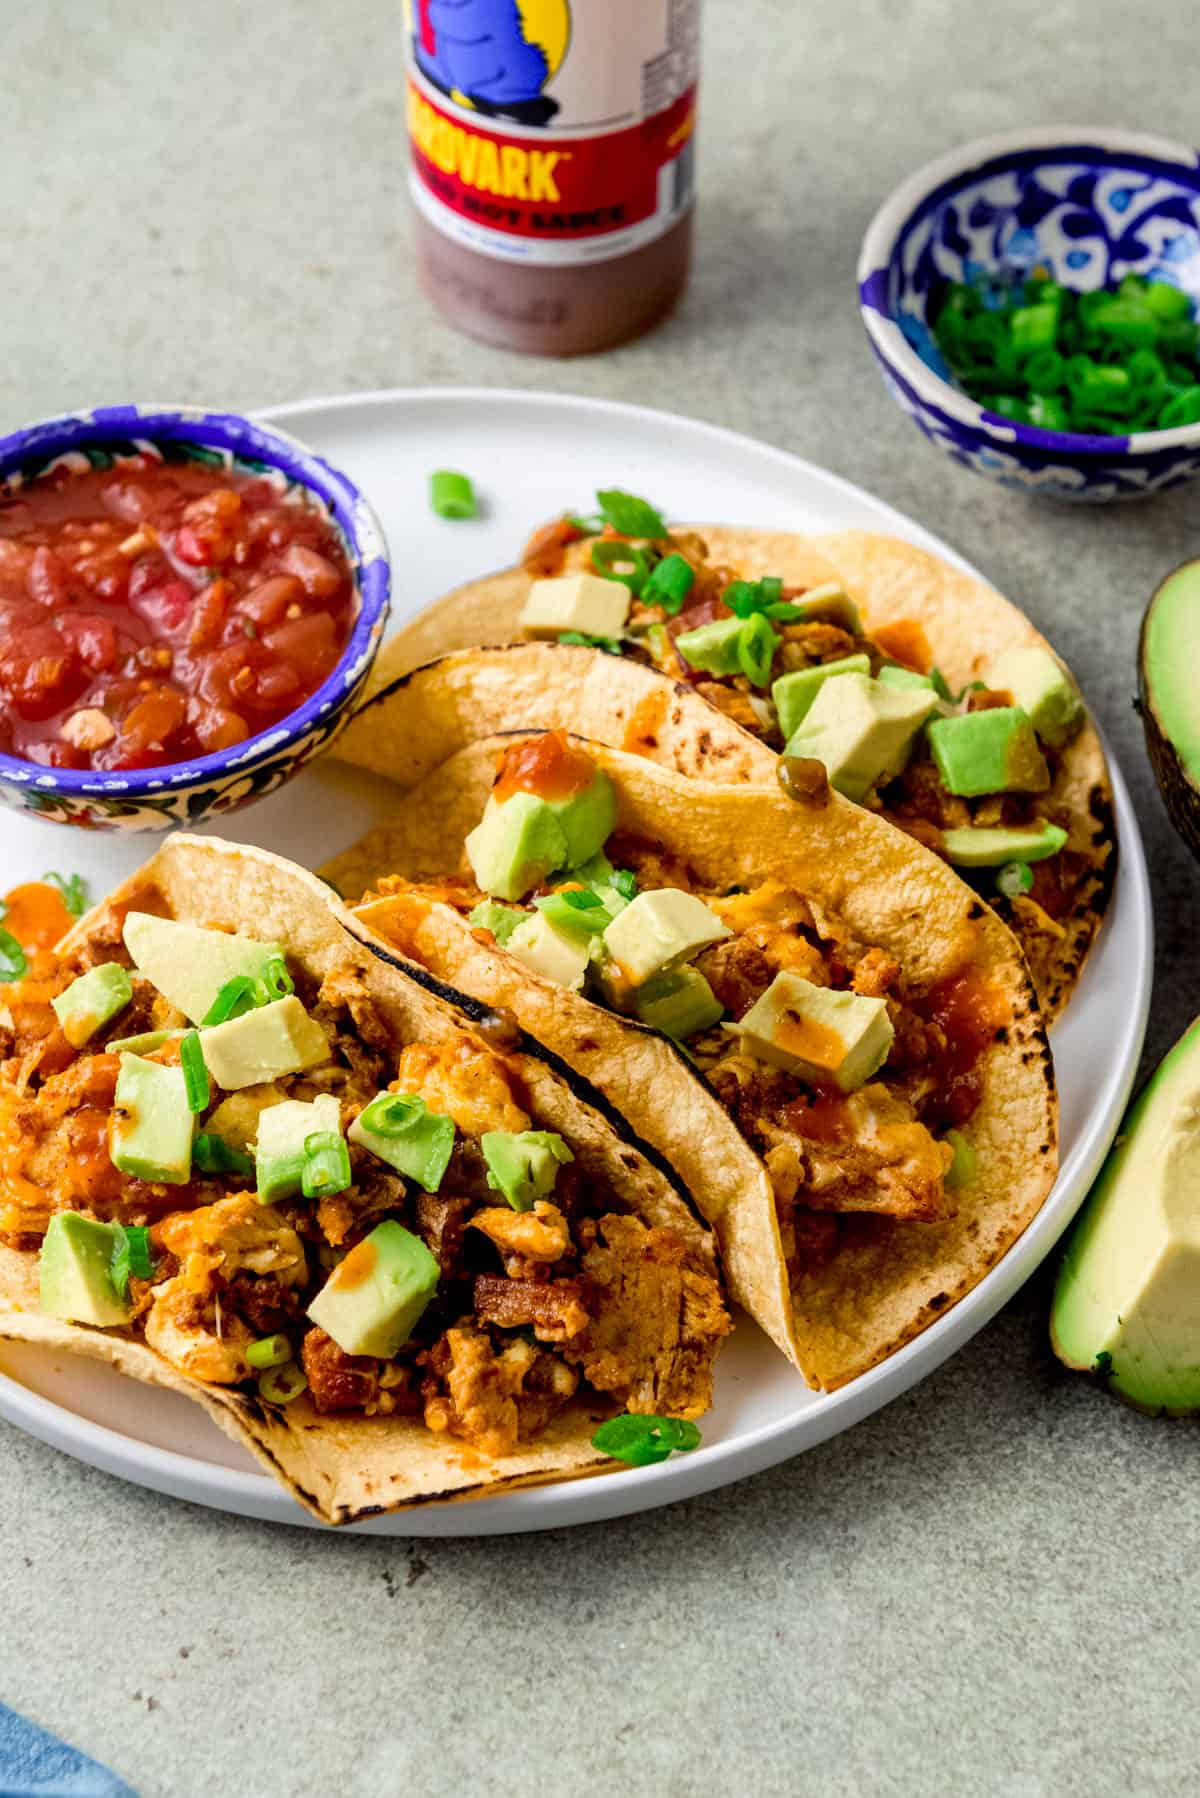 Breakfast tacos with chorizo and potatoes and topped with hot sauce and avocado.